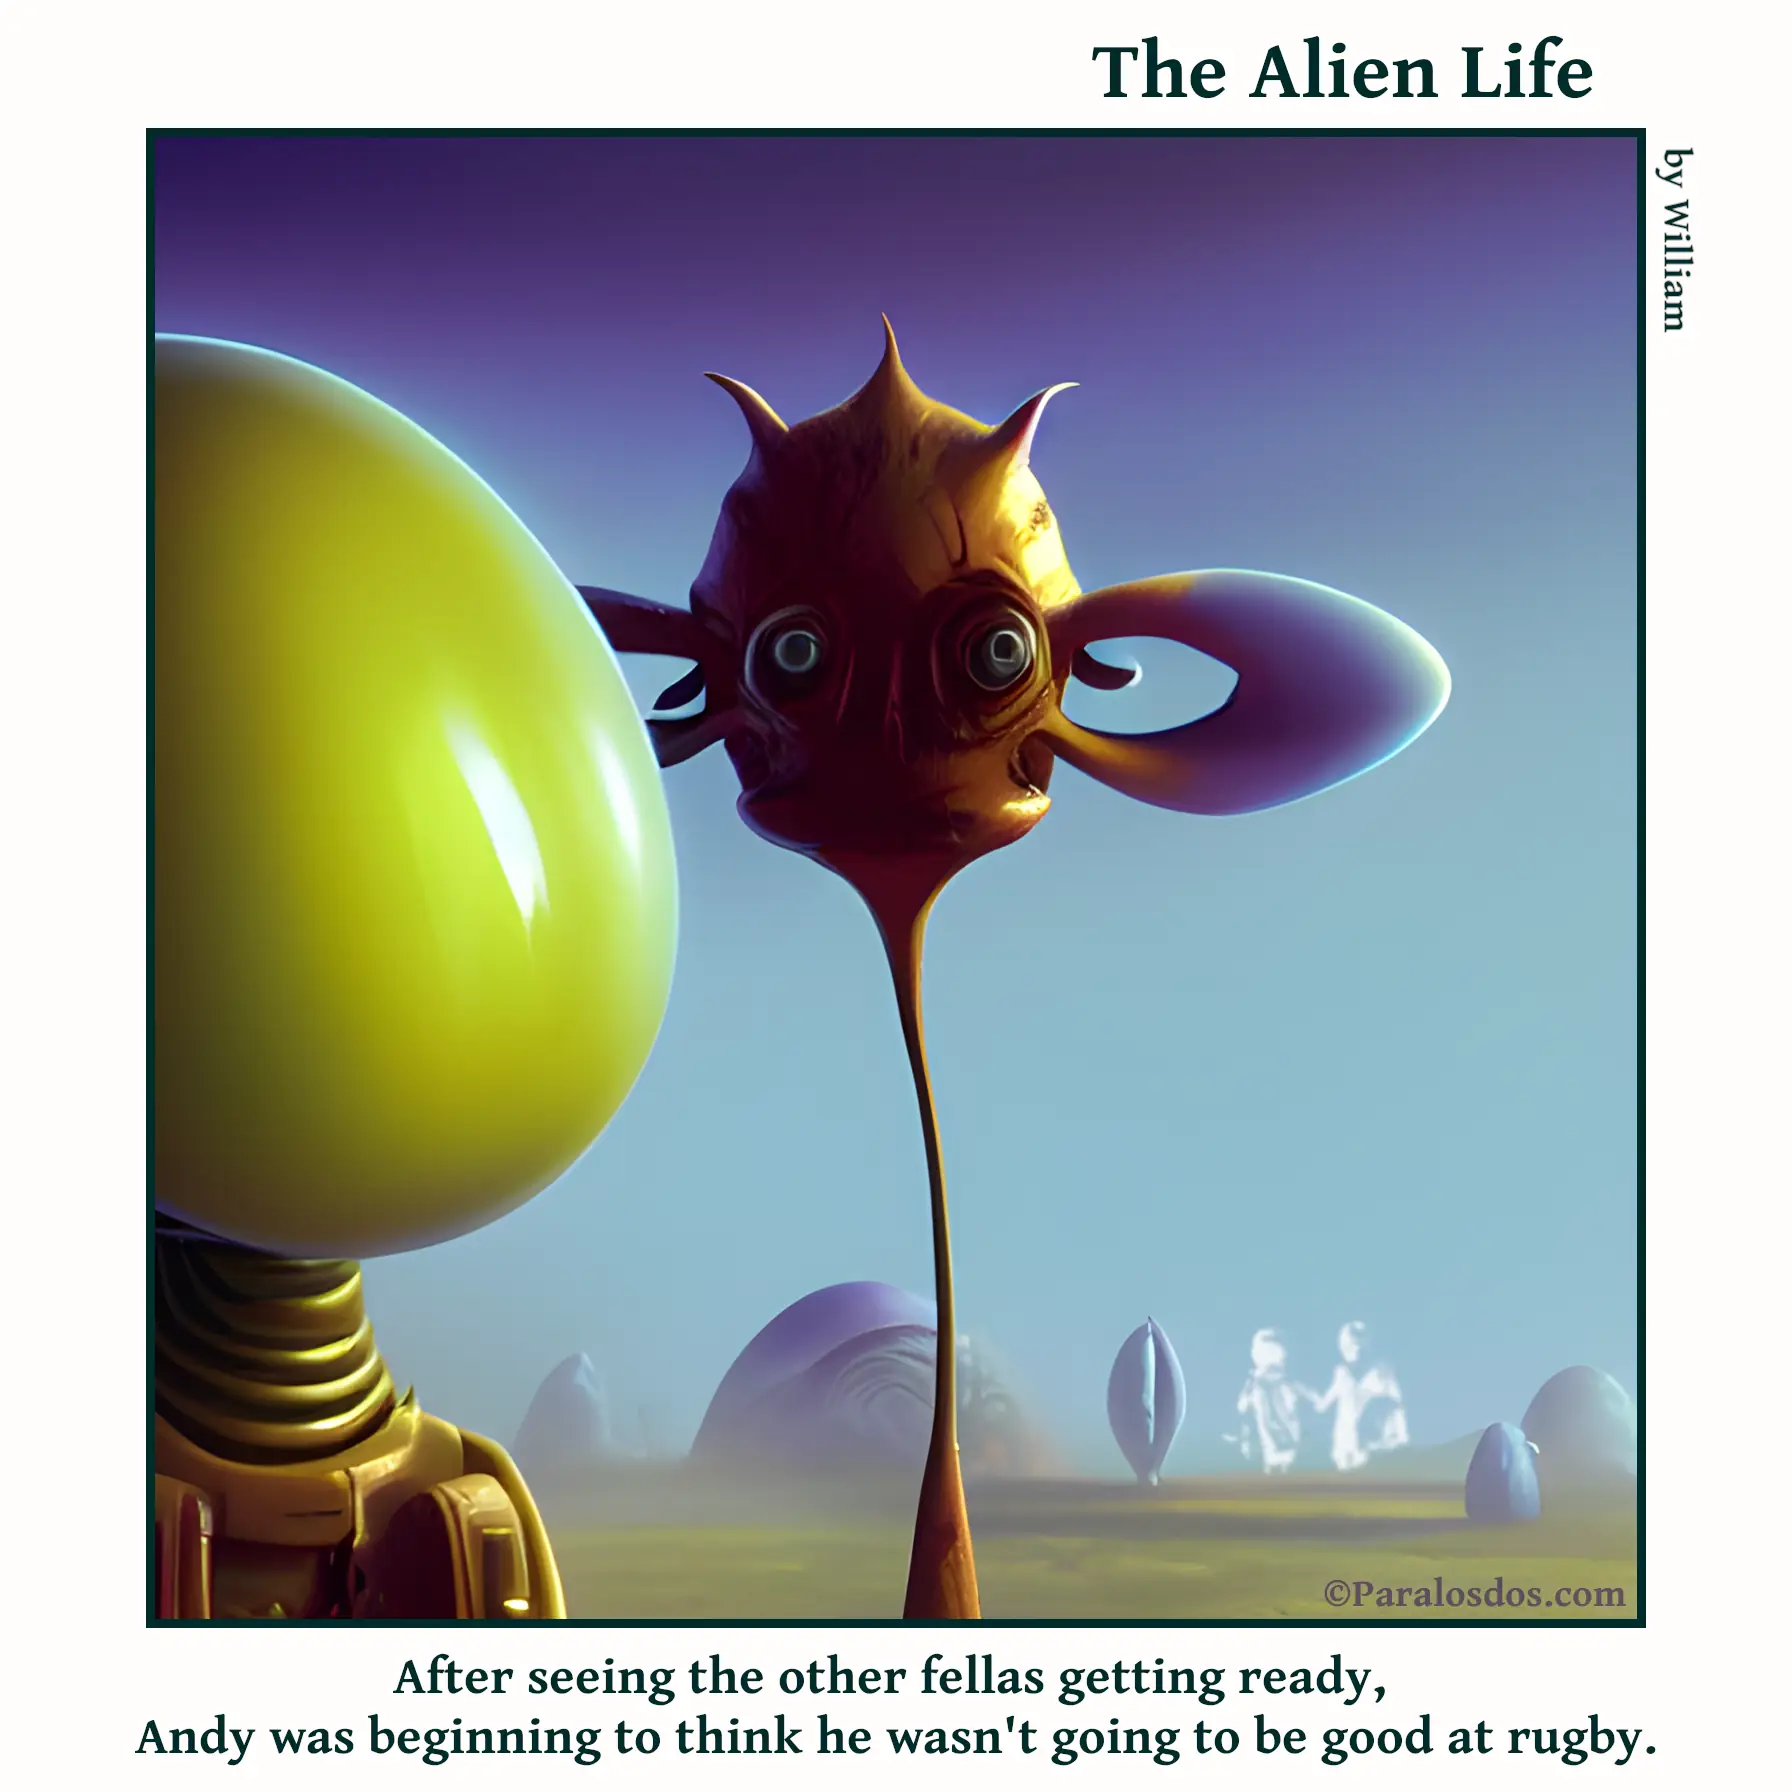 The Alien Life, one panel Comic. A weird looking alien with a crazy long, super thin neck and huge ears that have big holes in the middle is staring bug-eyed forward. There is a strong looking alien just visible in the left of the image, beside the first alien. The caption reads: After seeing the other fellas getting ready, Andy was beginning to think he wasn't going to be good at rugby.